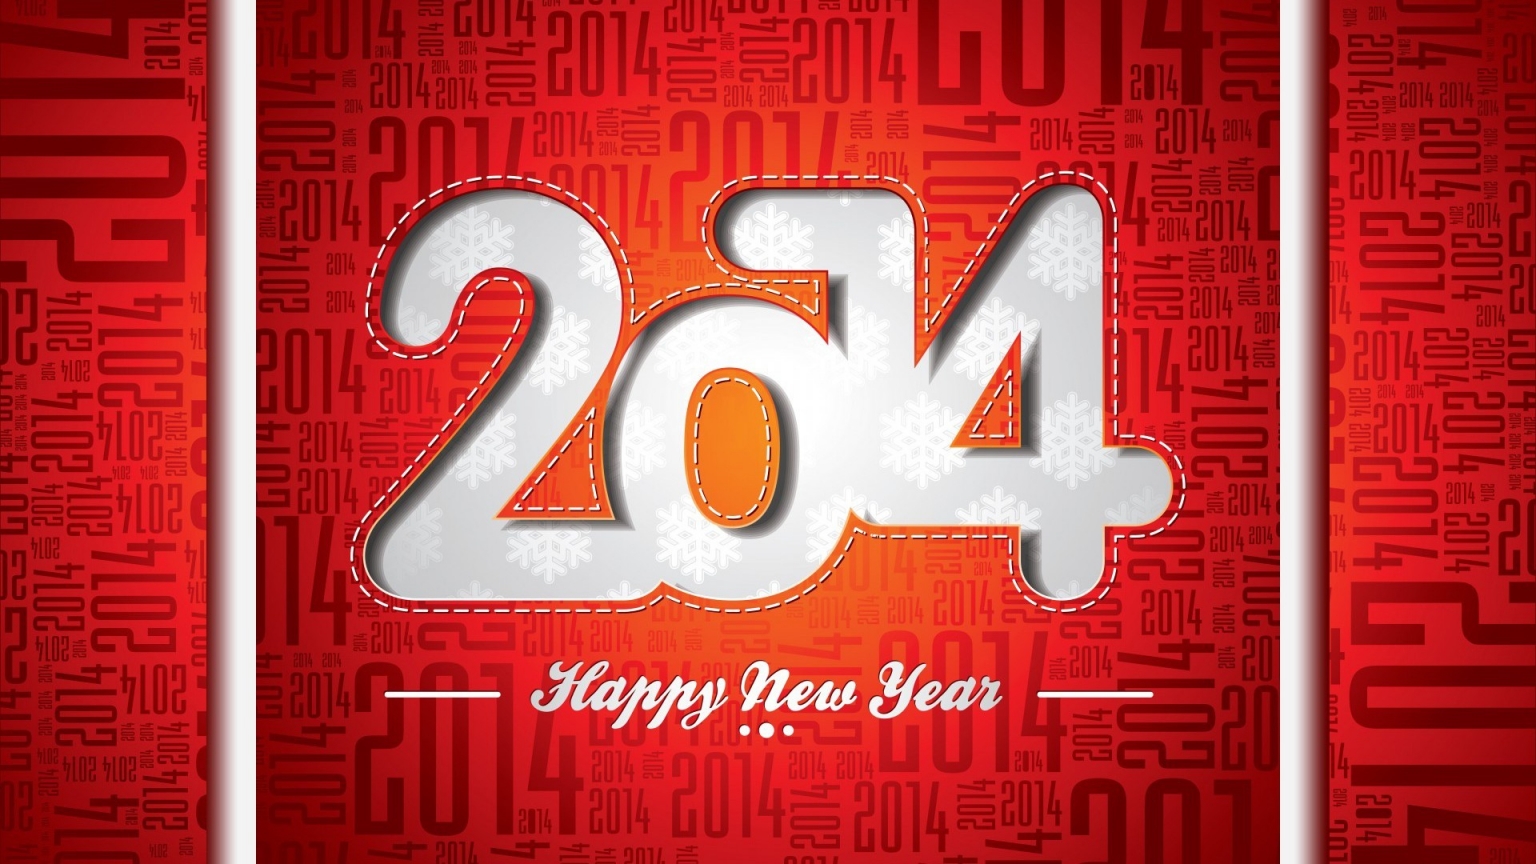 Happy New Year 2014 for 1536 x 864 HDTV resolution